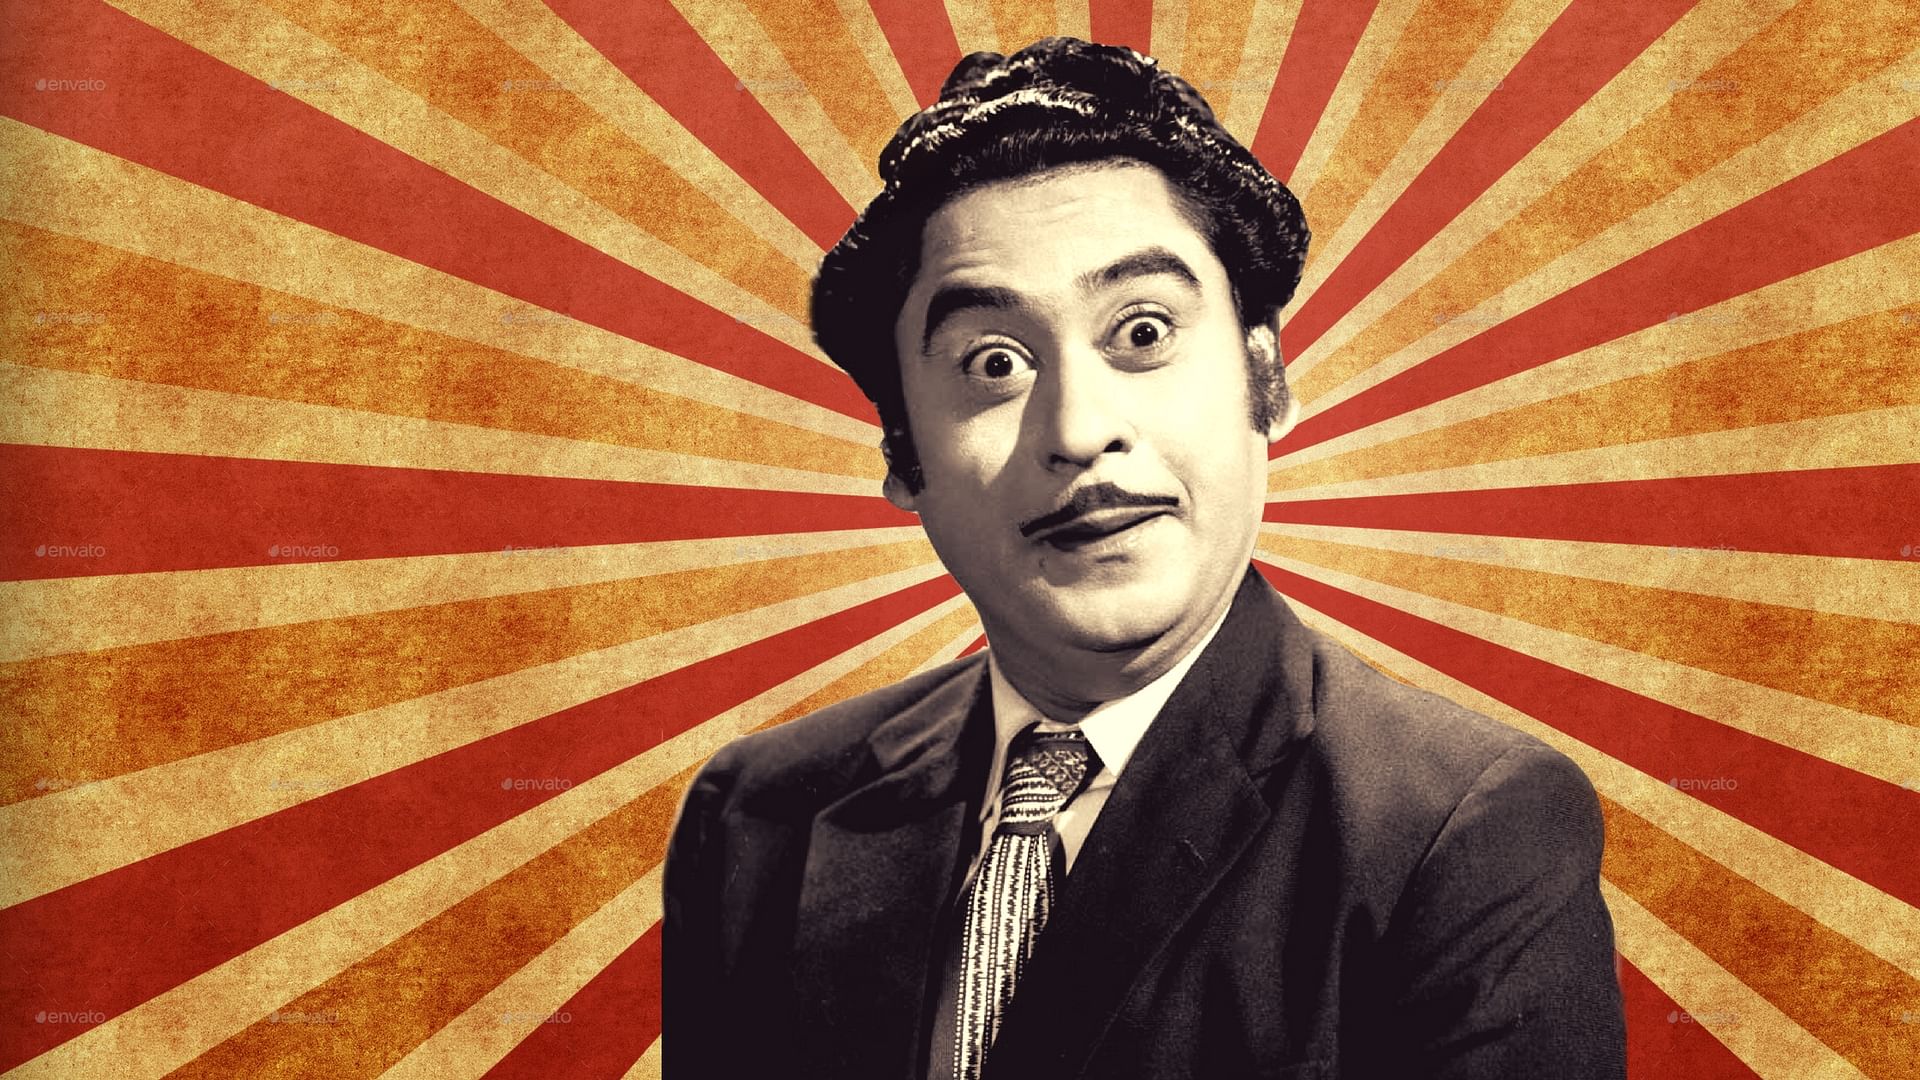 Kishore Kumar's Music Still Brings Out the Mad, Wild, Crazy In Us